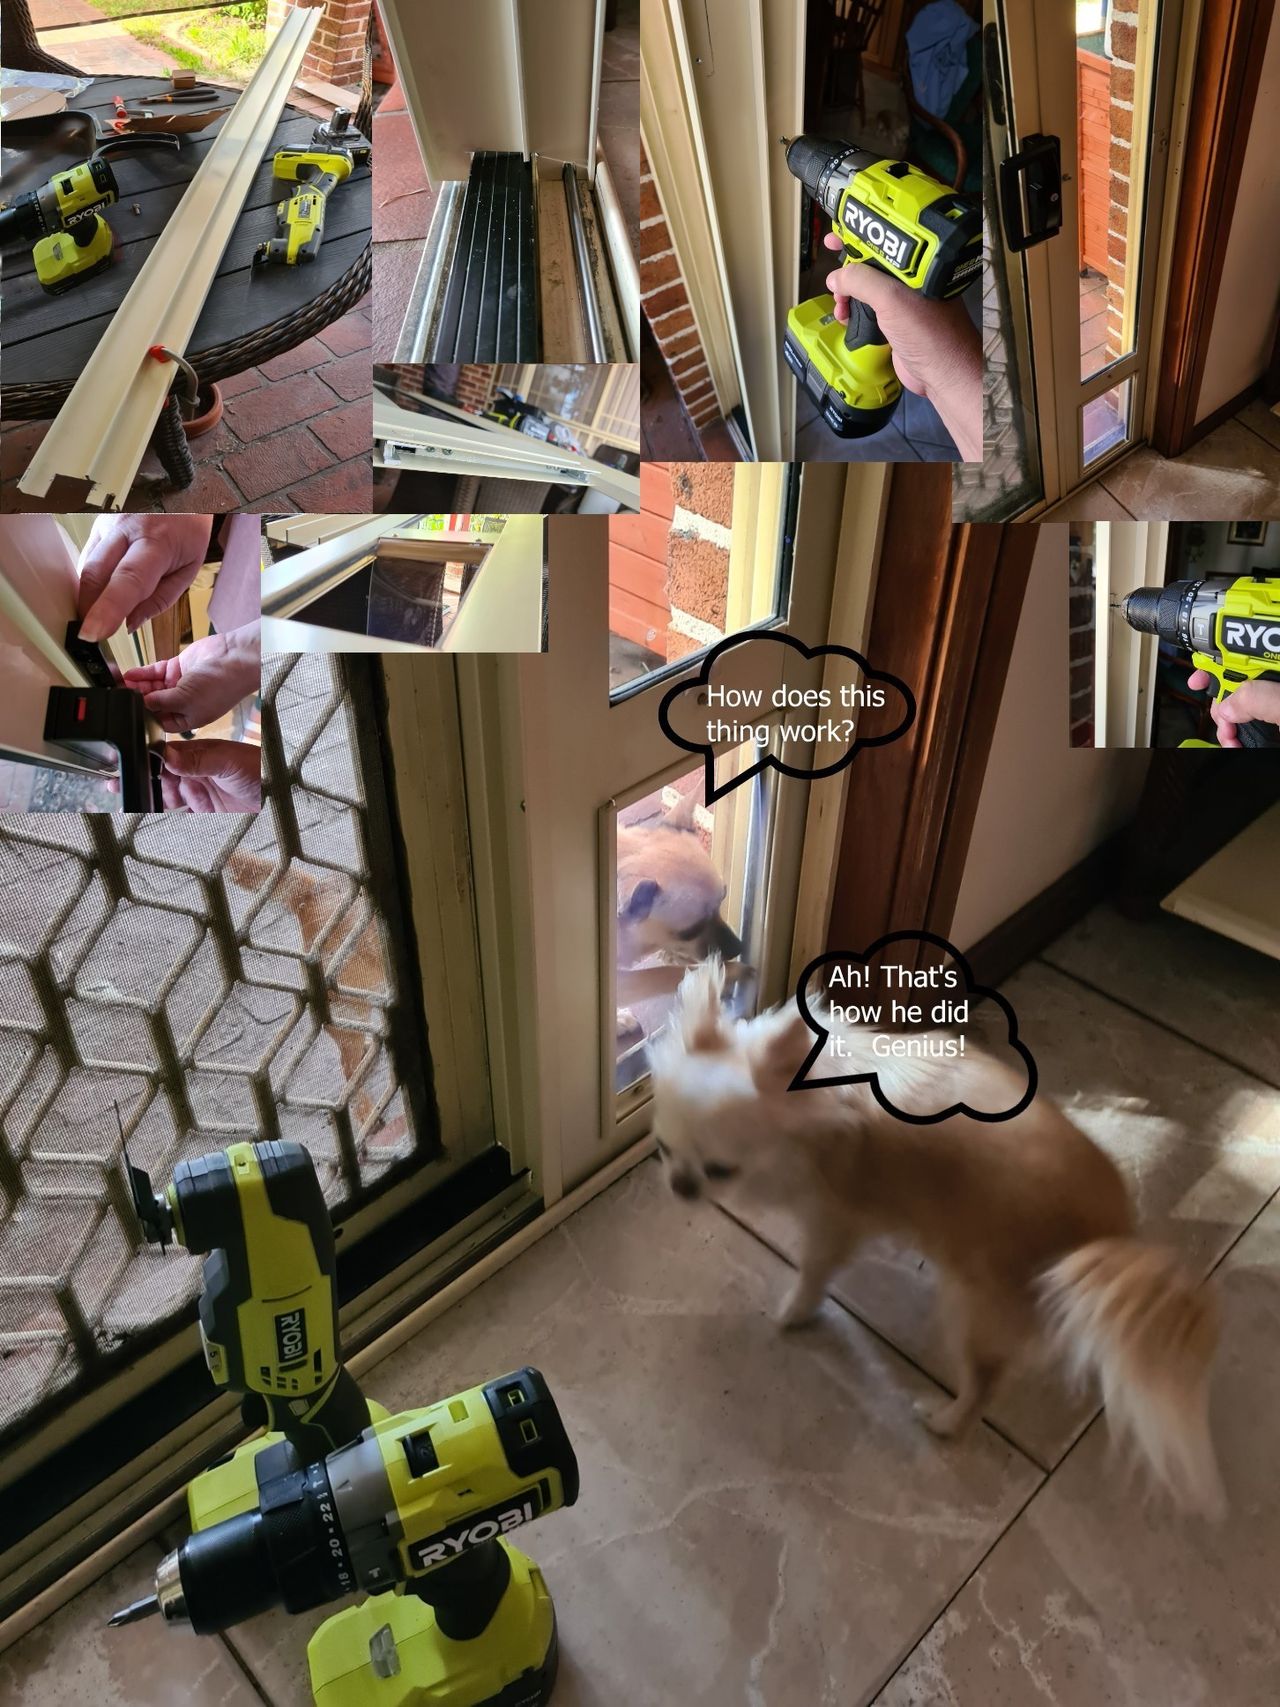 Well I watched them cut, drill, put many screws in, move locks and didn't know what they were doing.  But guess what, We are freeee!!  Thanks Ryobi!!  PS Mum and Dad love the bonus of less mess in the house.  WOOT!  Think these tools are now called....  Win Win.  Dusty & Maizie